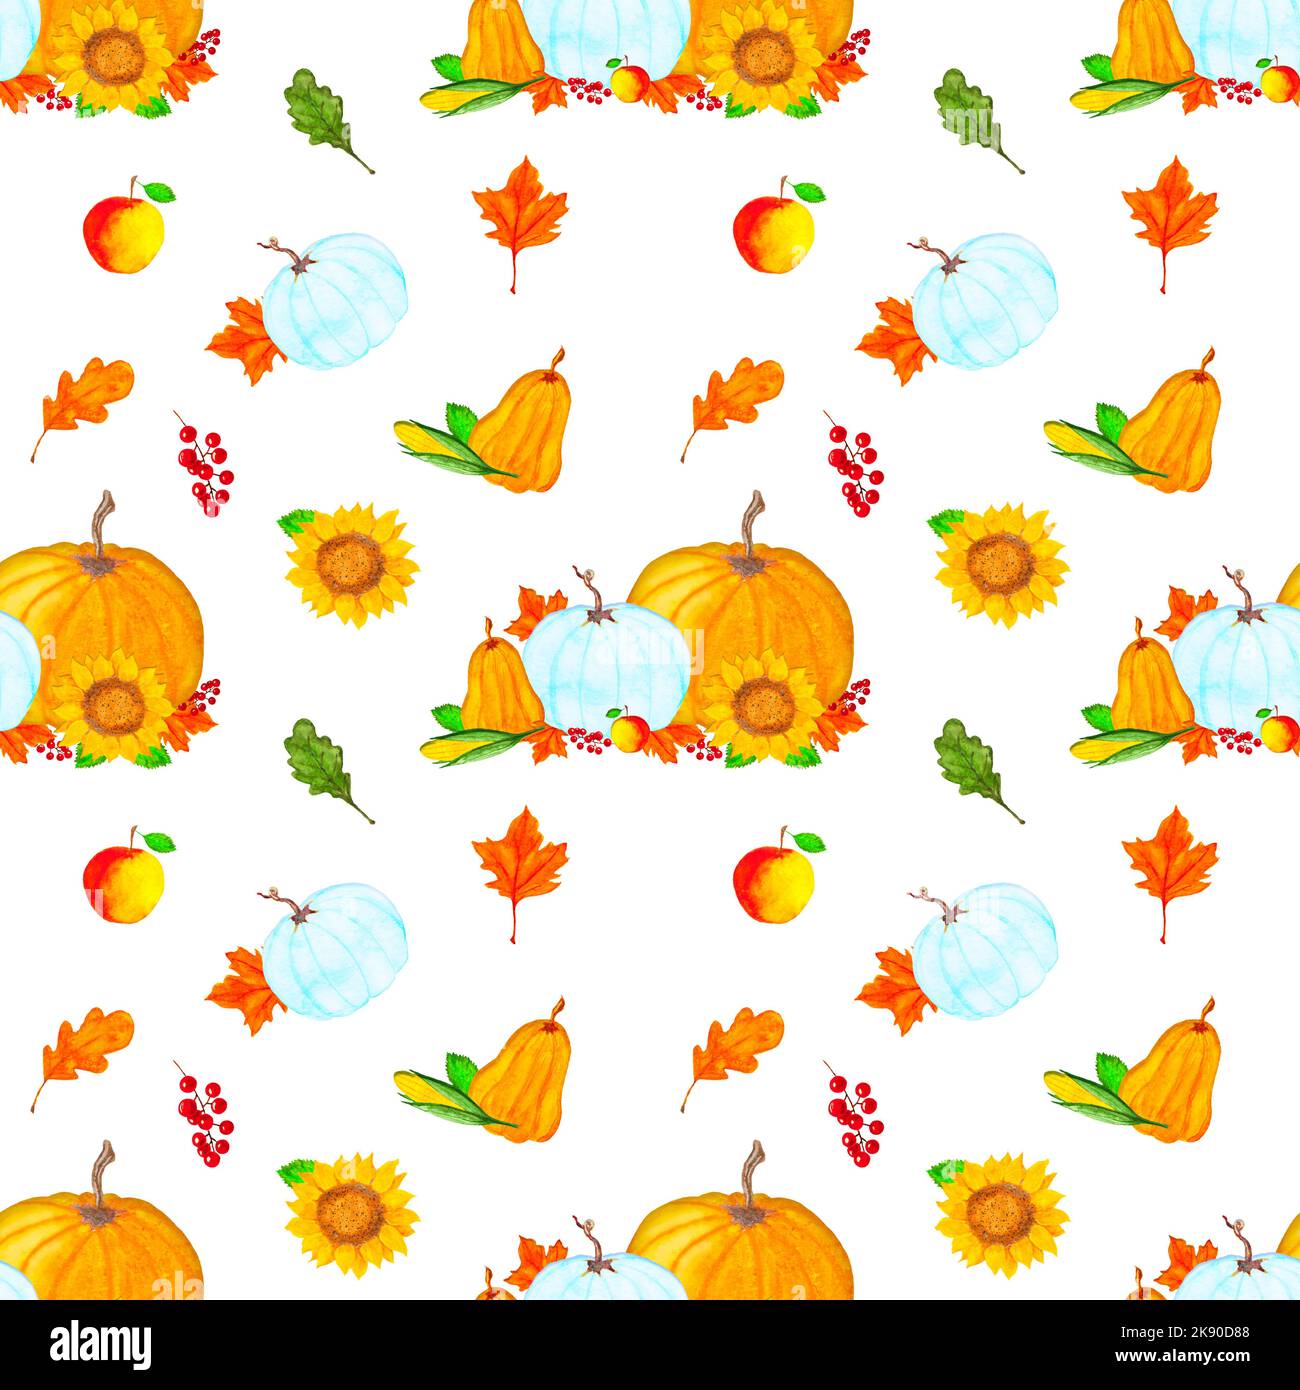 Thanksgiving day background, seamless background with watercolor pumpkins, autumn leaves, berries on white background, watercolor raster Thanksgiving Stock Photo